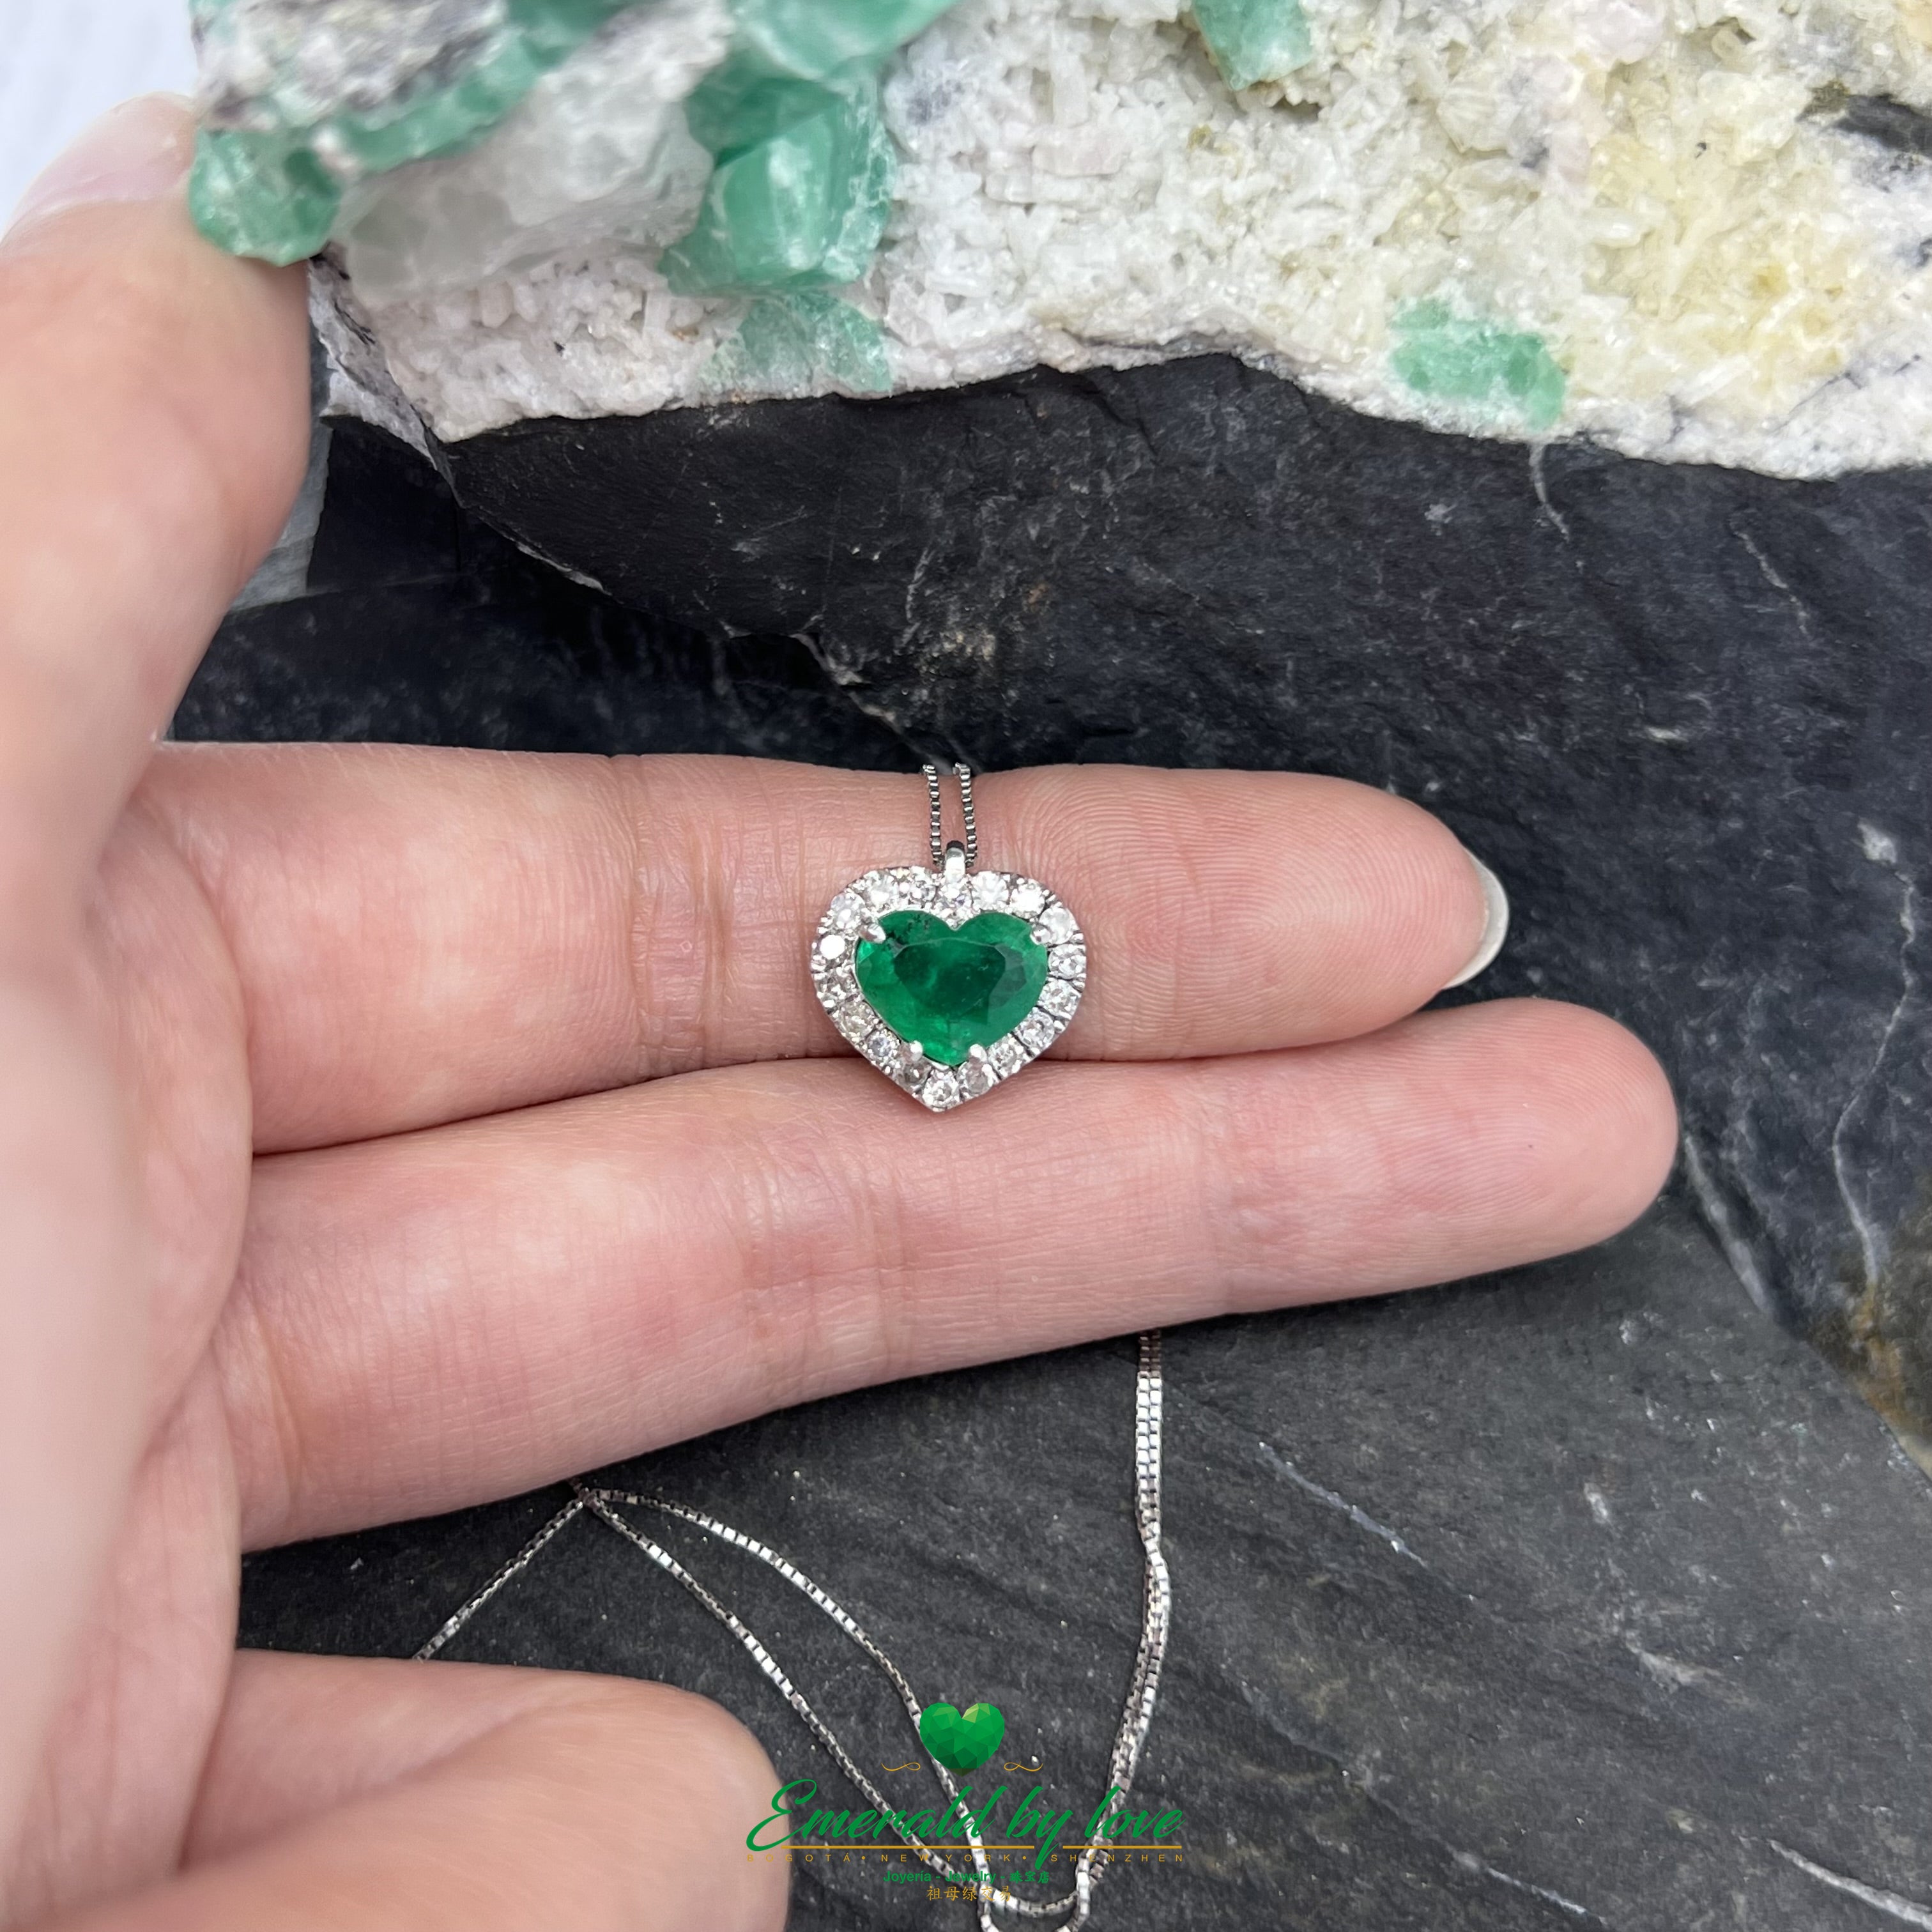 Heart-Shaped Emerald Pendant in 18K White Gold with Diamonds